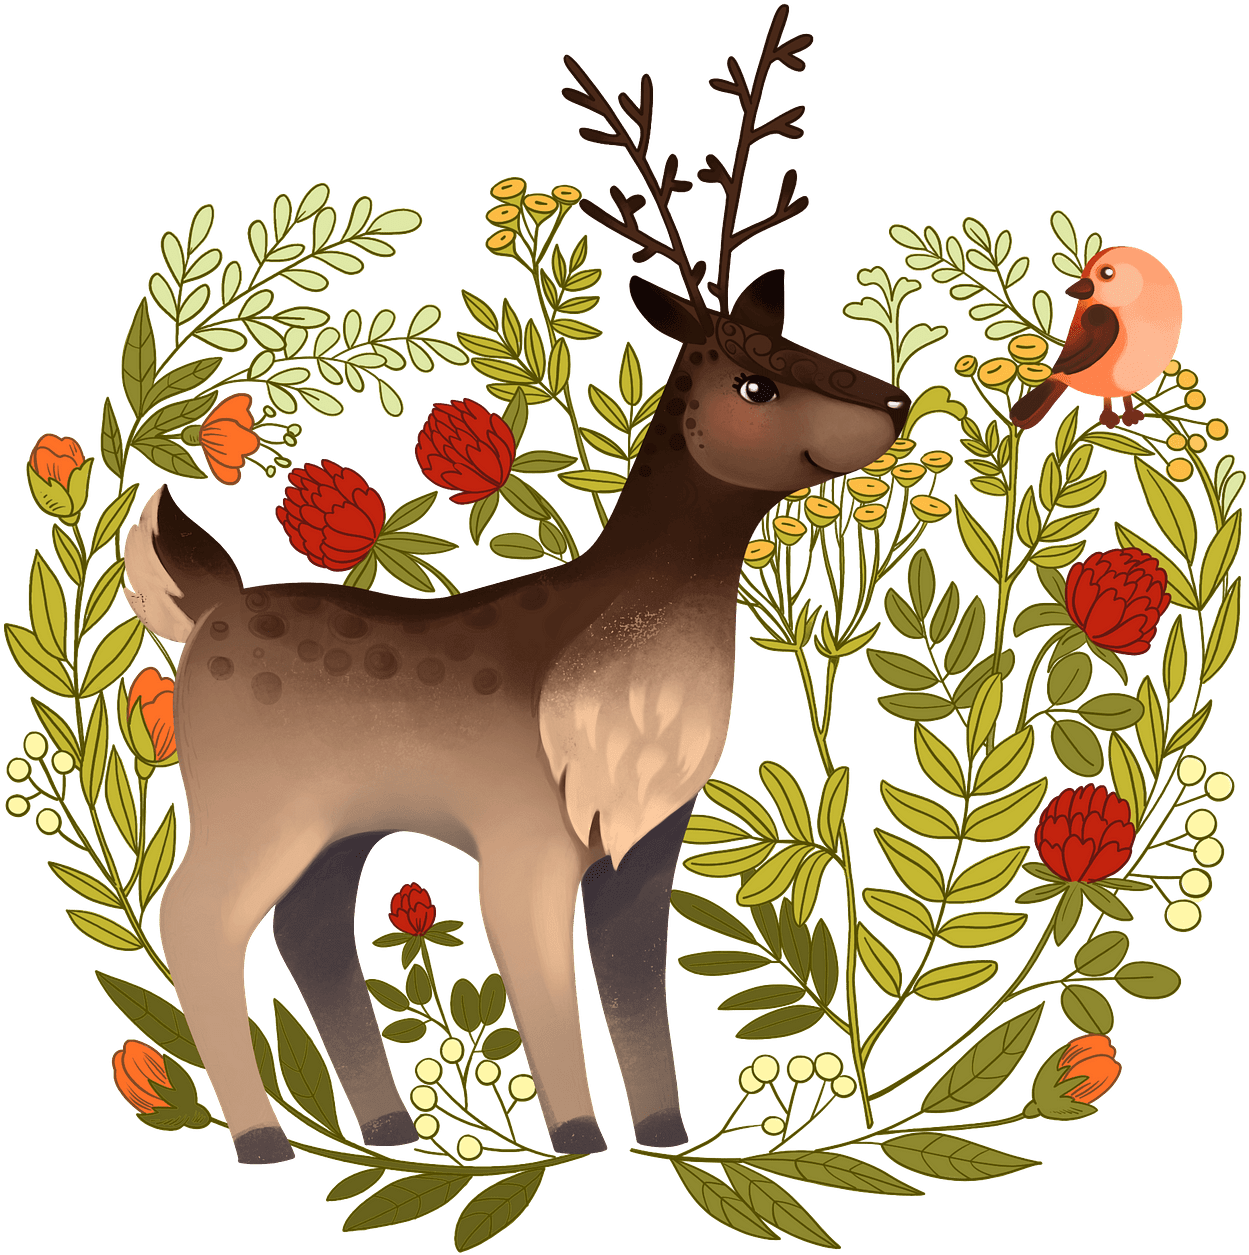 A Cartoon Of A Deer And A Bird Surrounded By Flowers